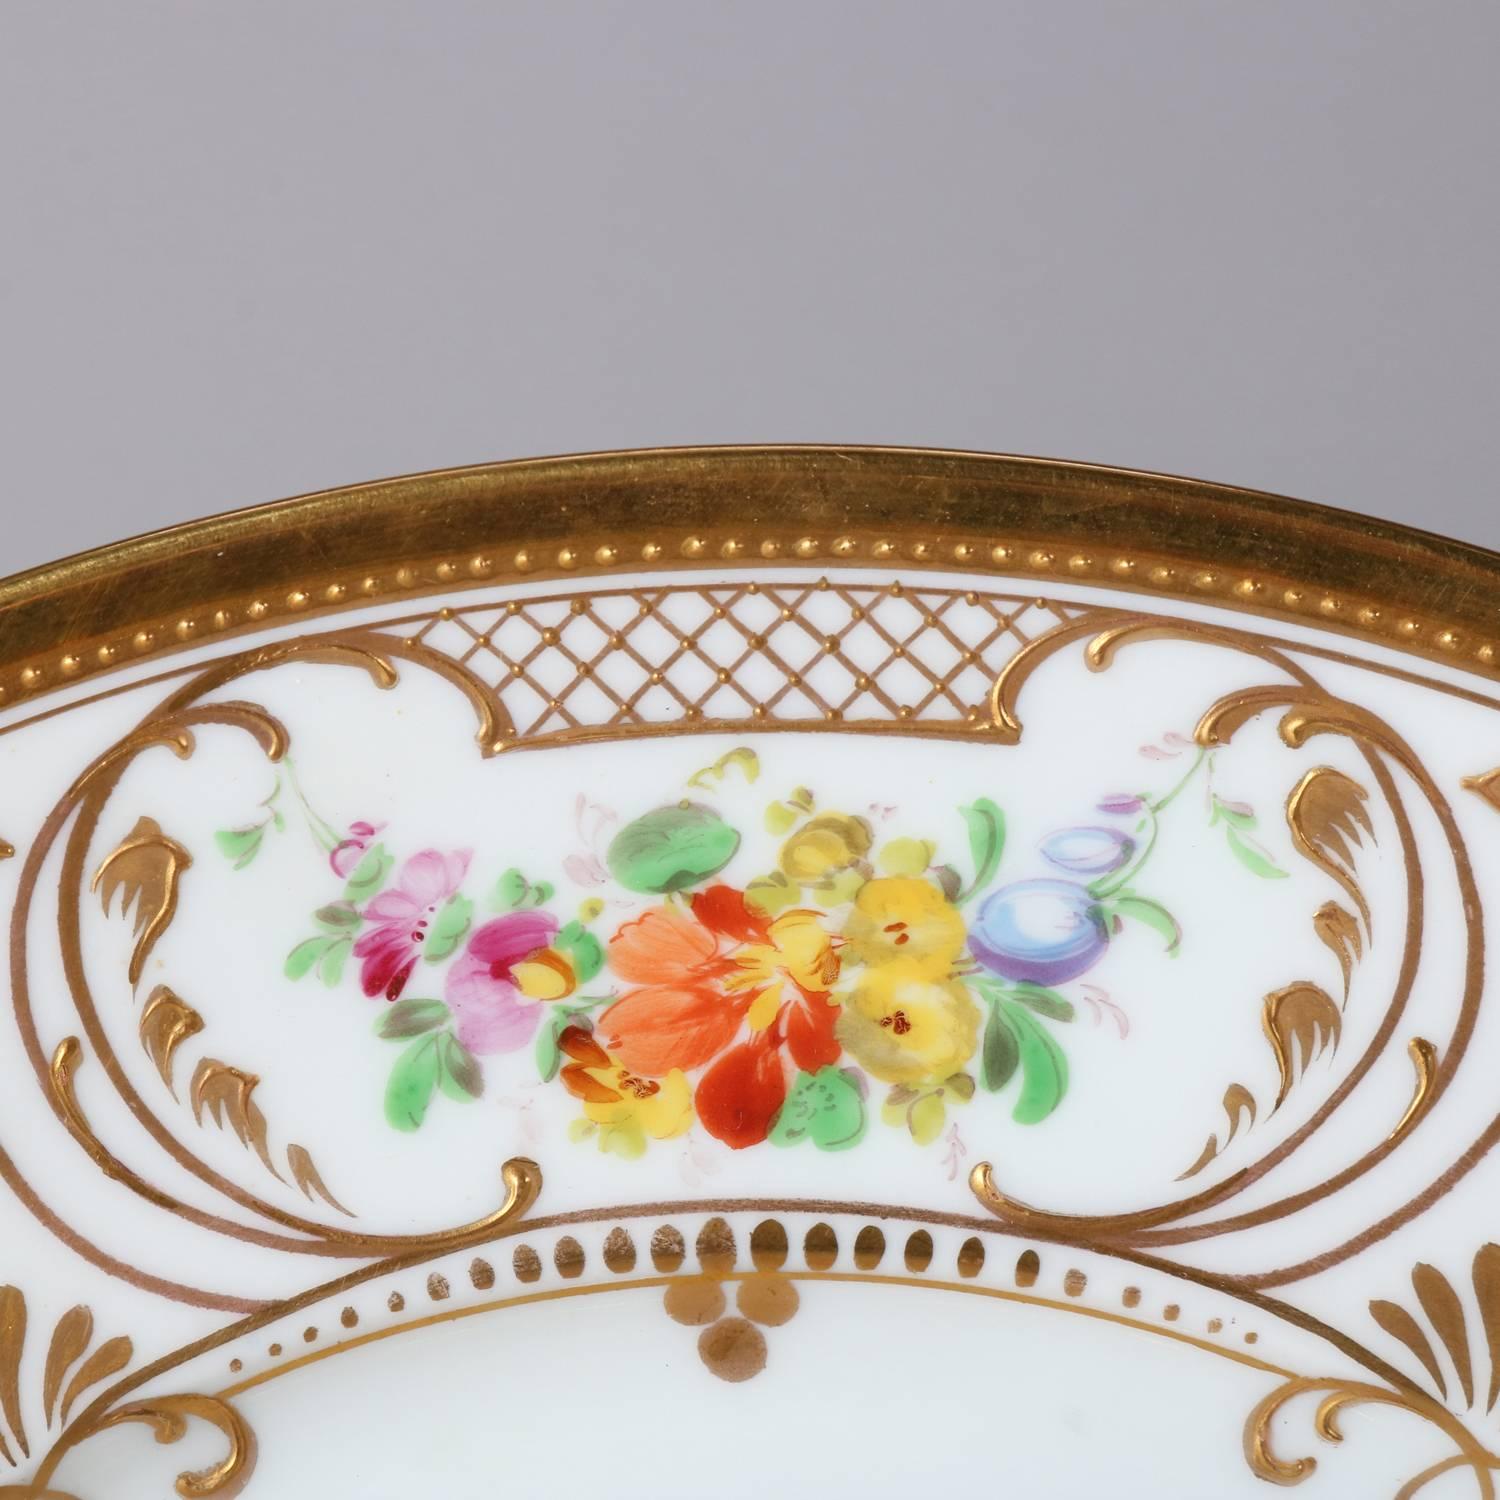 Set of twelve German hand-painted china plates by Rosenthal feature central floral bouquet with scroll, foliate, and diamond gilt decorated border containing floral reserves, en verso mark 